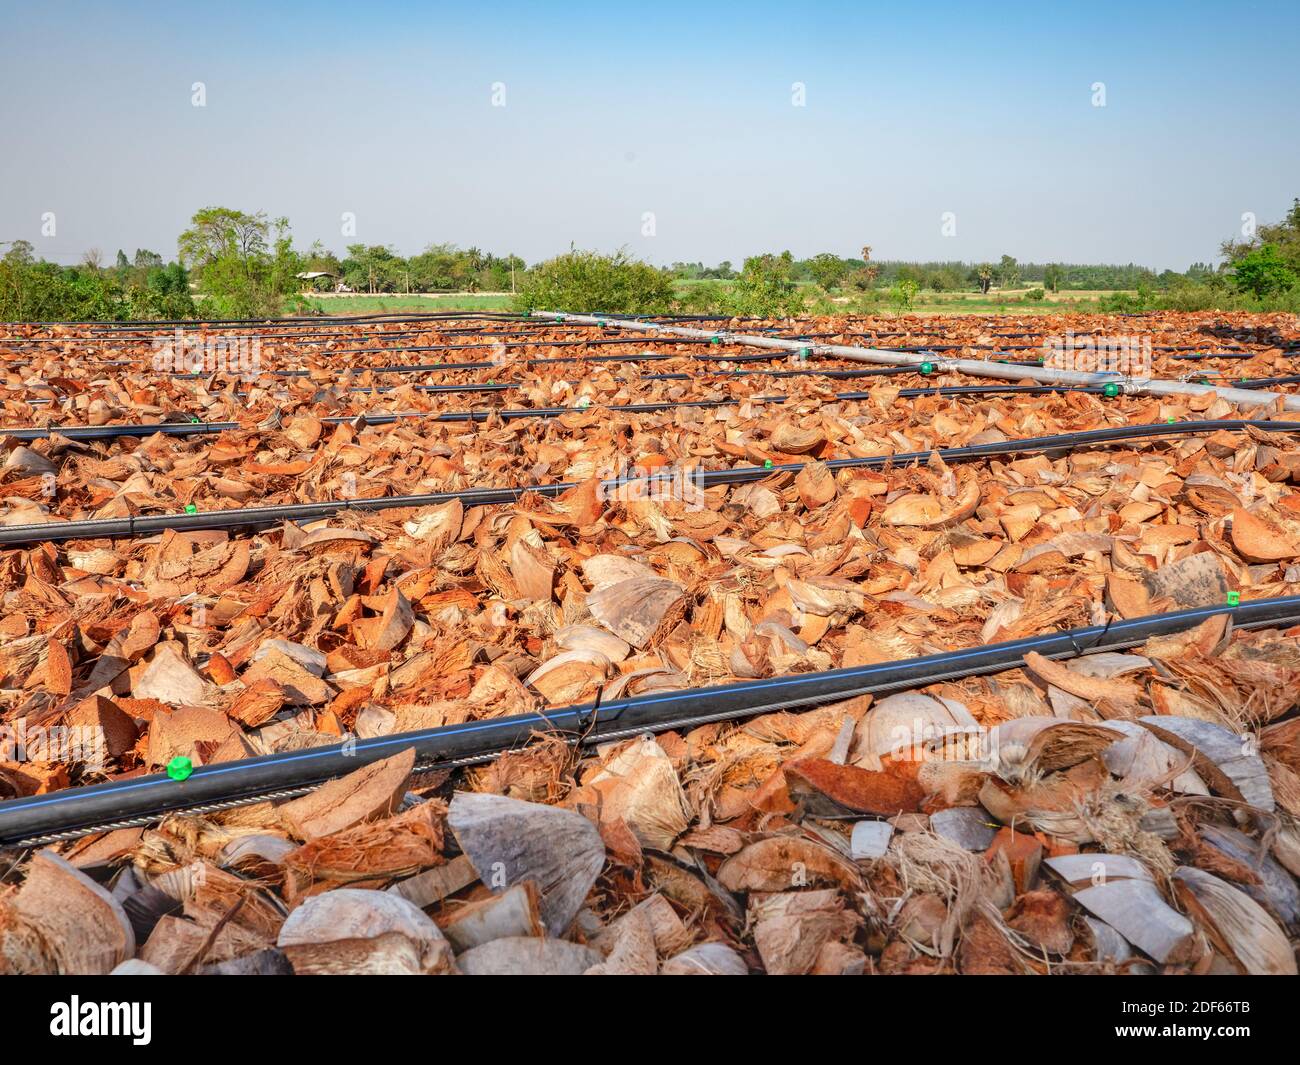 Biofilter using coconut husks to remove unpleasant odour from an animal byproduct processing plant. Stock Photo